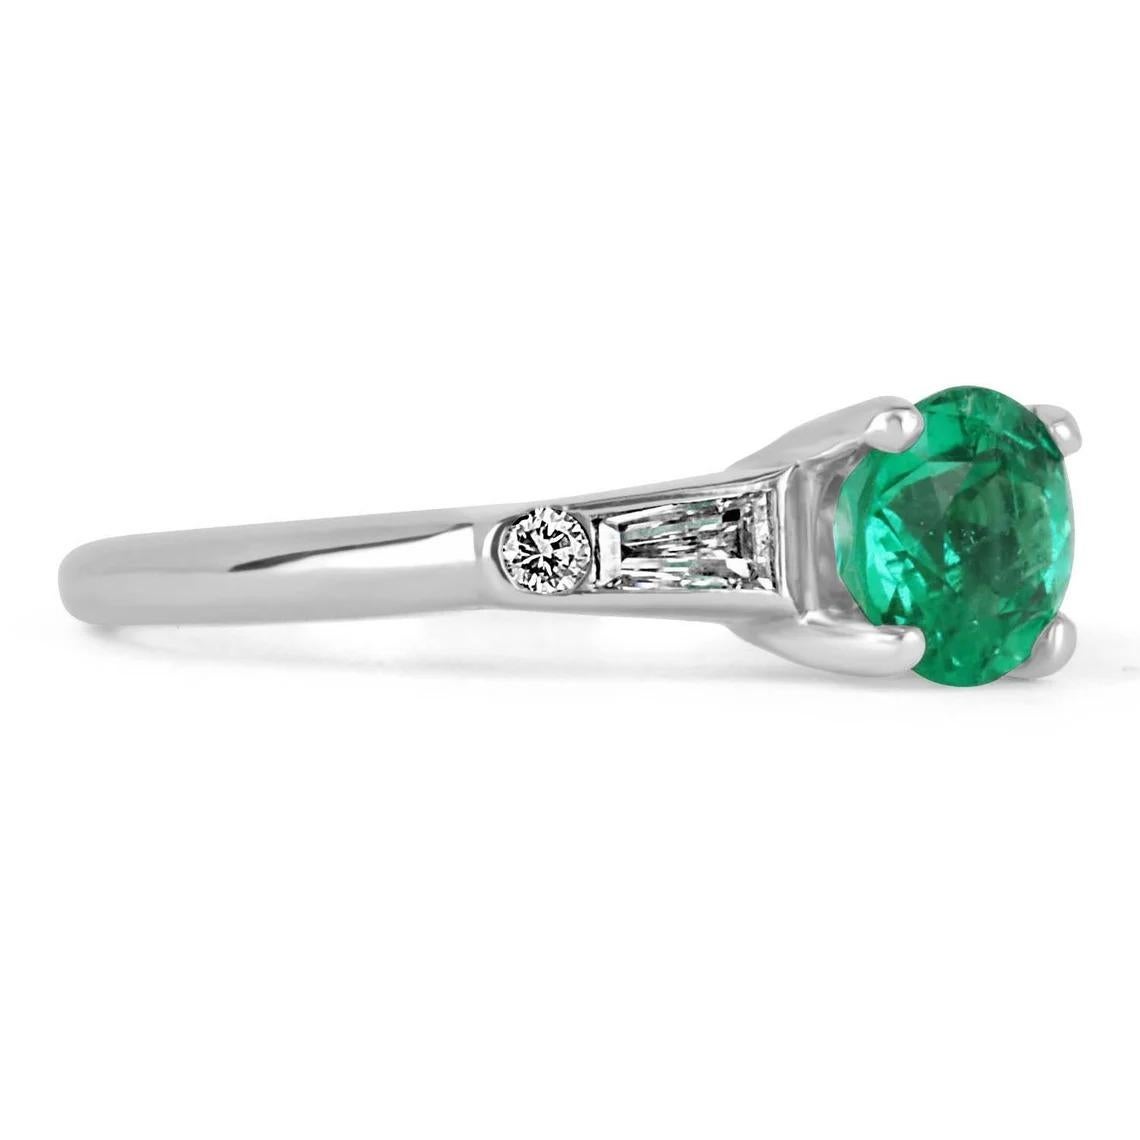 A classic among engagement rings, this emerald, and tapered diamond engagement ring features a vibrant round Colombian emerald. The genuine gemstone has incredible deep bluish-green color and excellent eye clarity. The gem sits gently in a